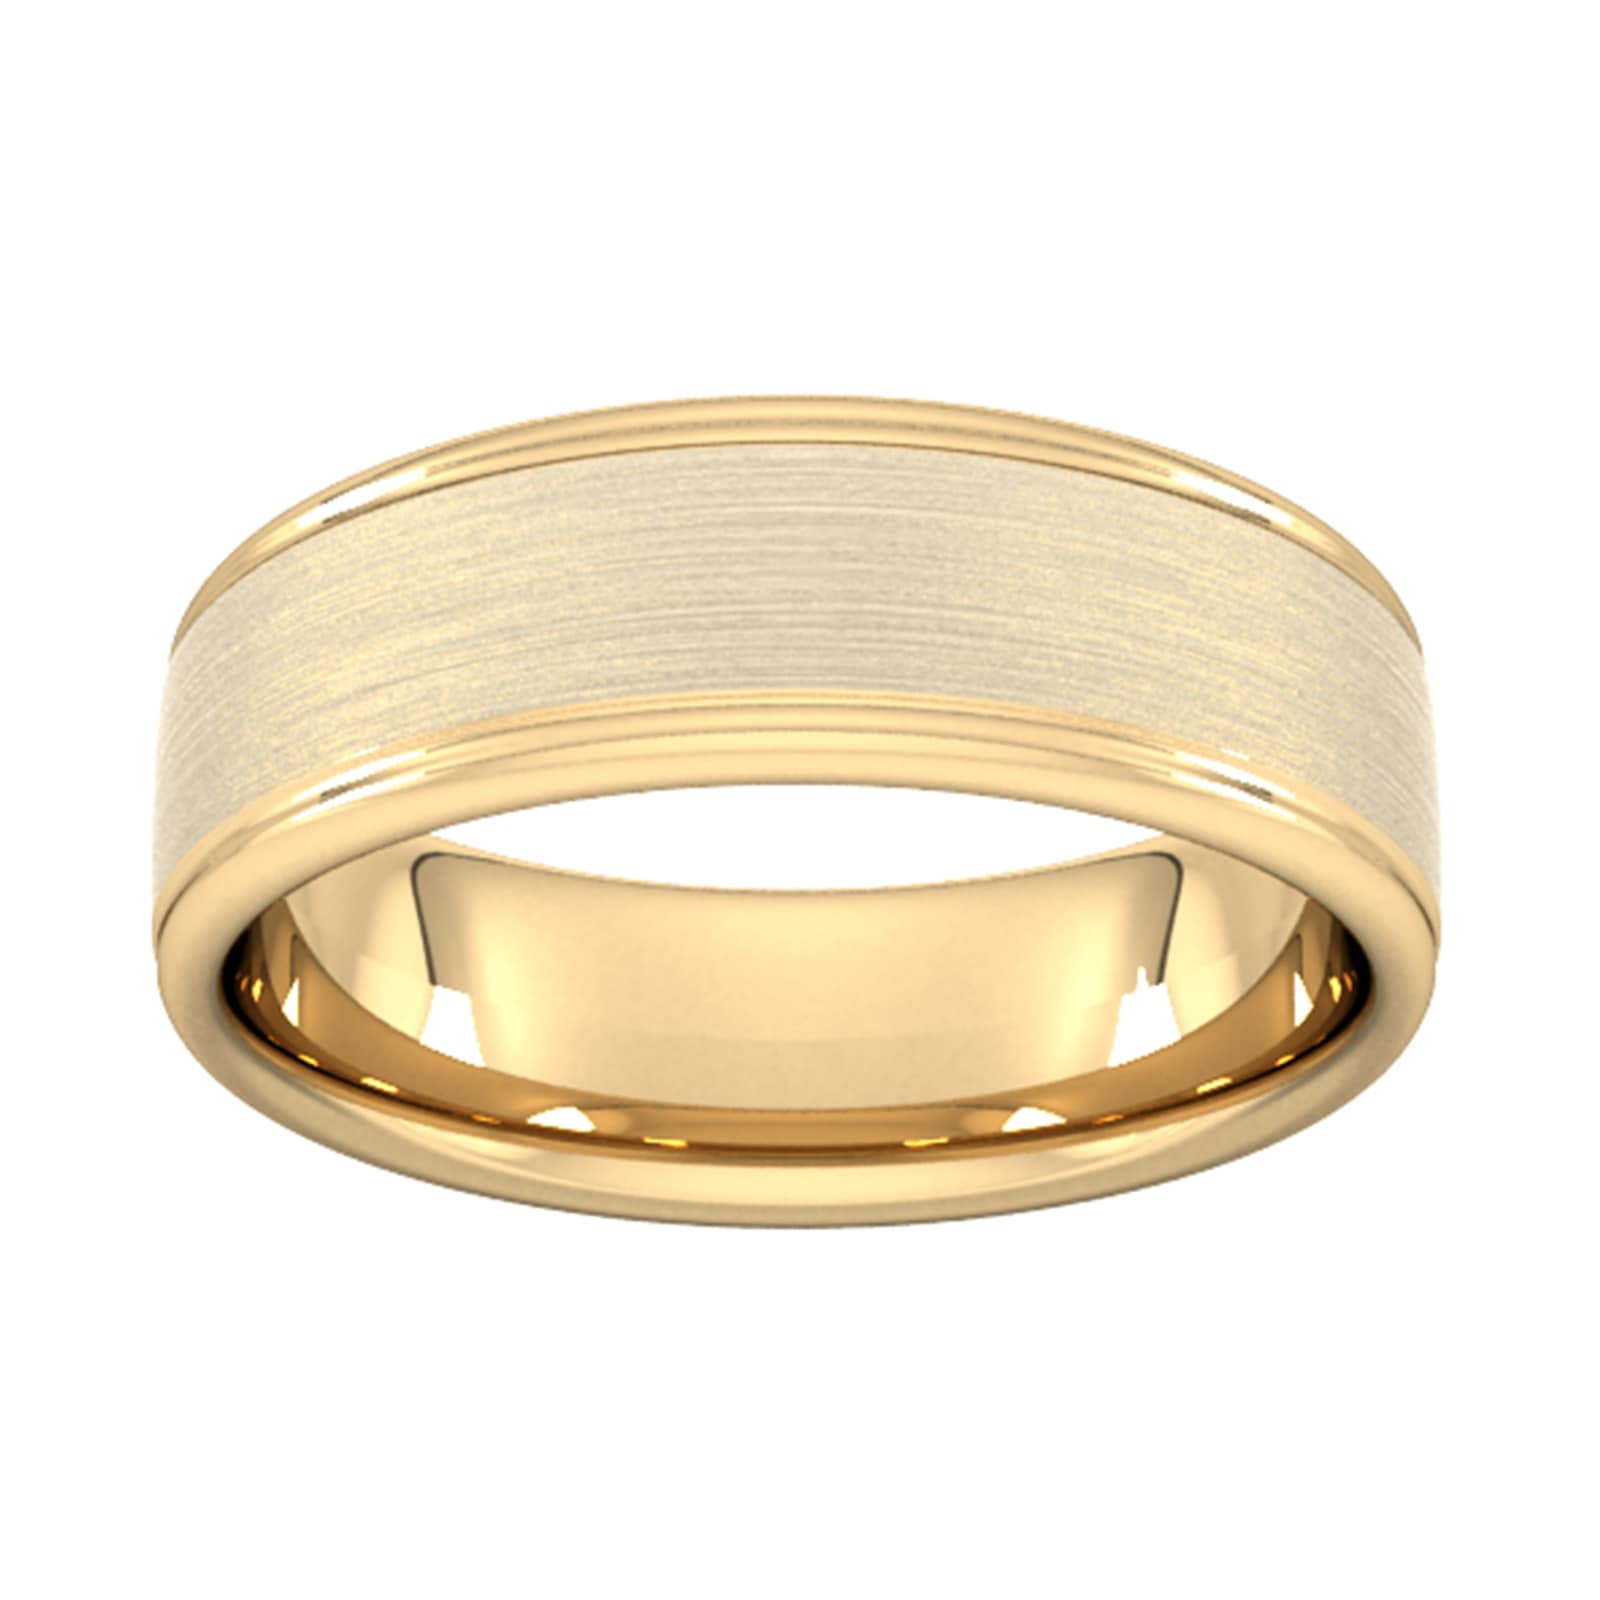 7mm Slight Court Extra Heavy Matt Centre With Grooves Wedding Ring In 9 Carat Yellow Gold - Ring Size U